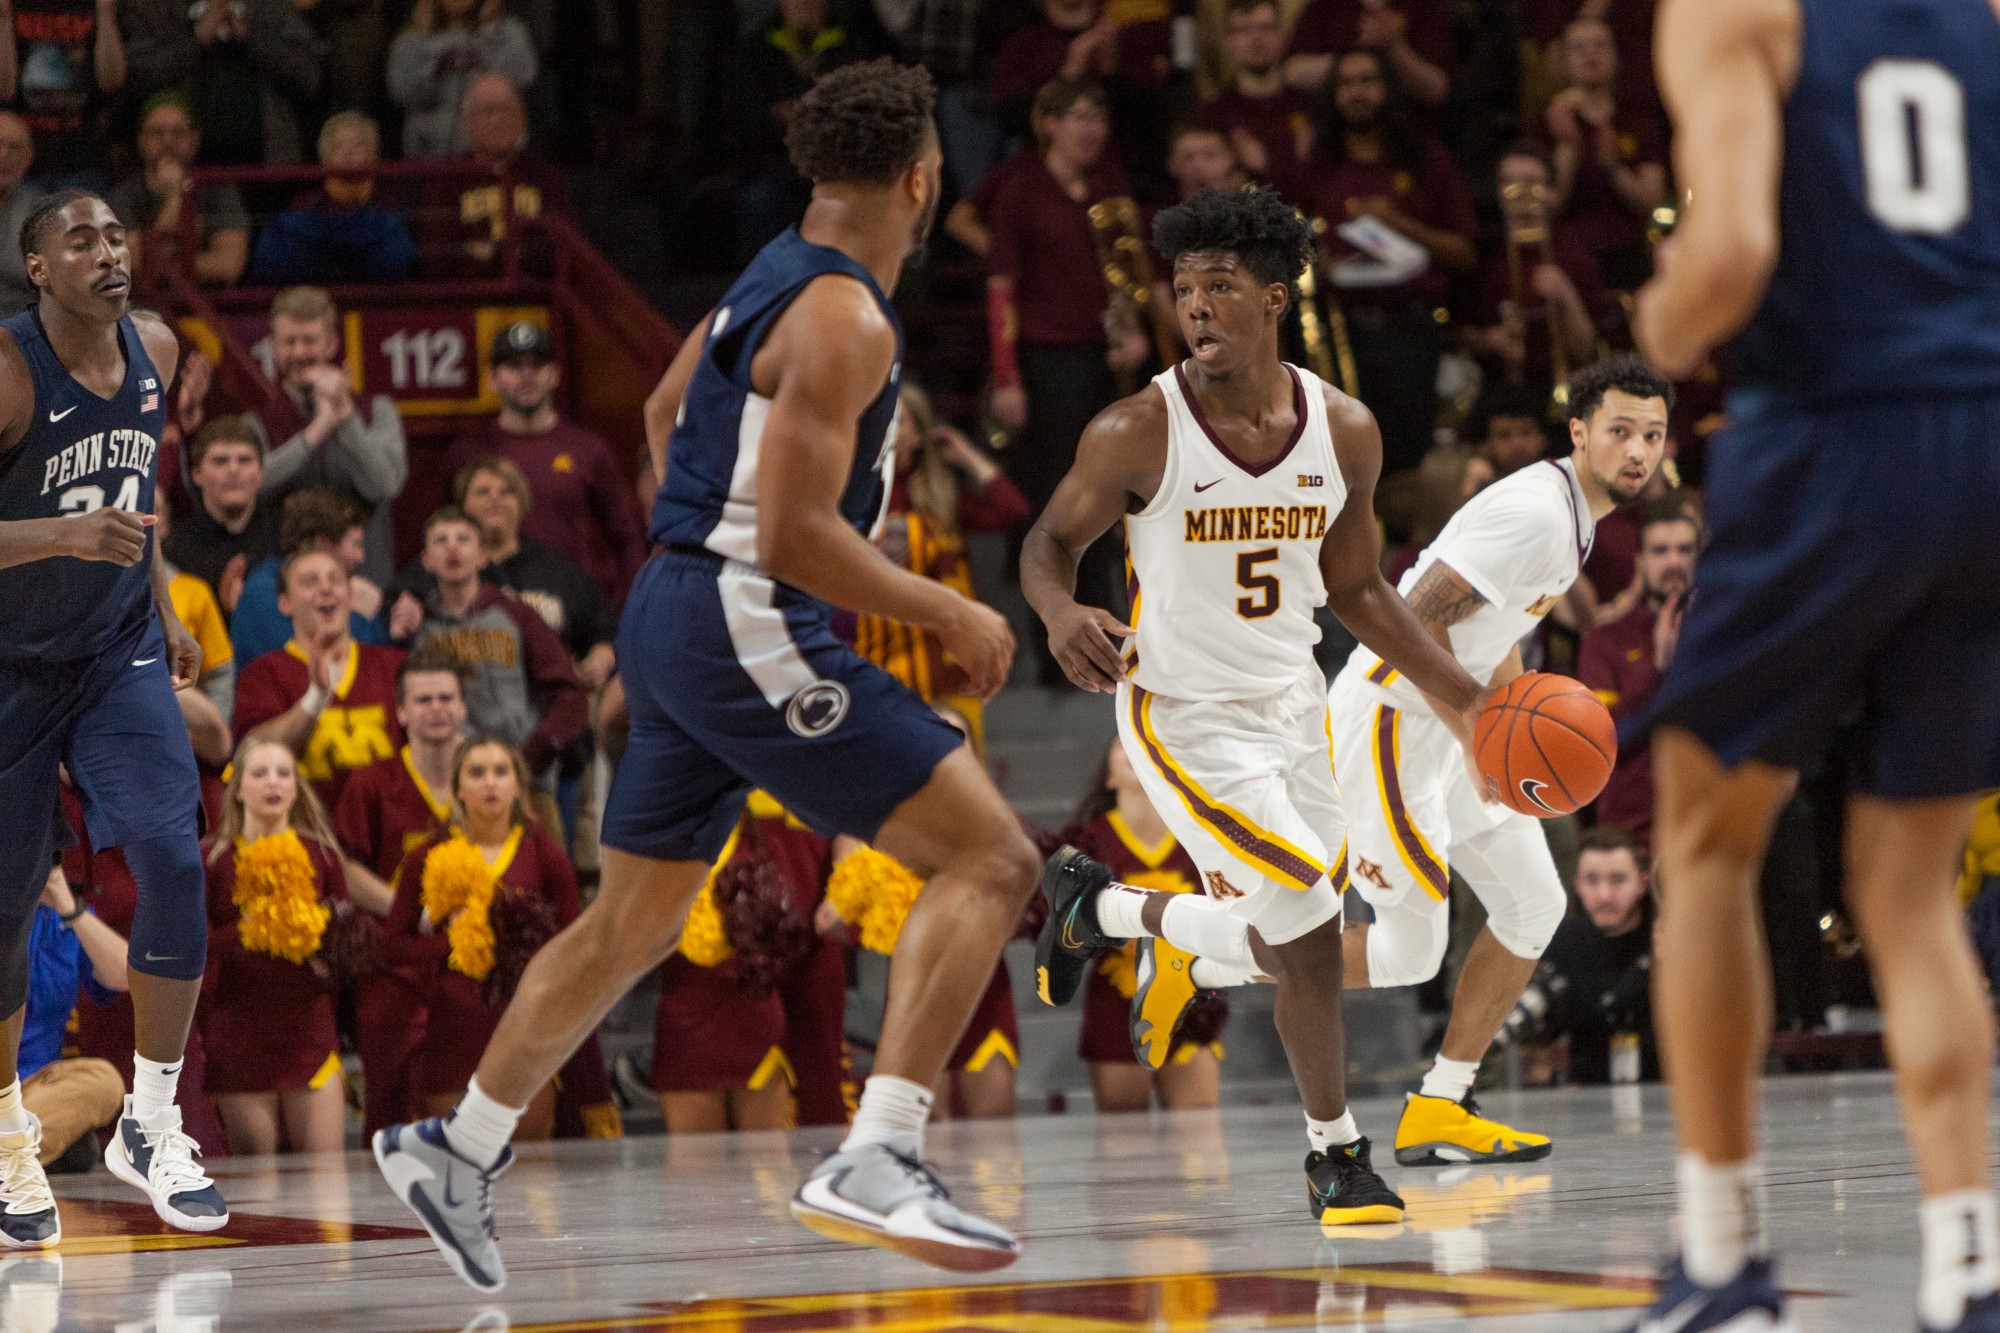 Gophers Guard Marcus Carr makes his way down the court at Williams Arena on Wednesday, Jan. 15.  Minnesota defeated the Penn State Nittany Lions 75-69. (Kamaan Richards / Minnesota Daily)